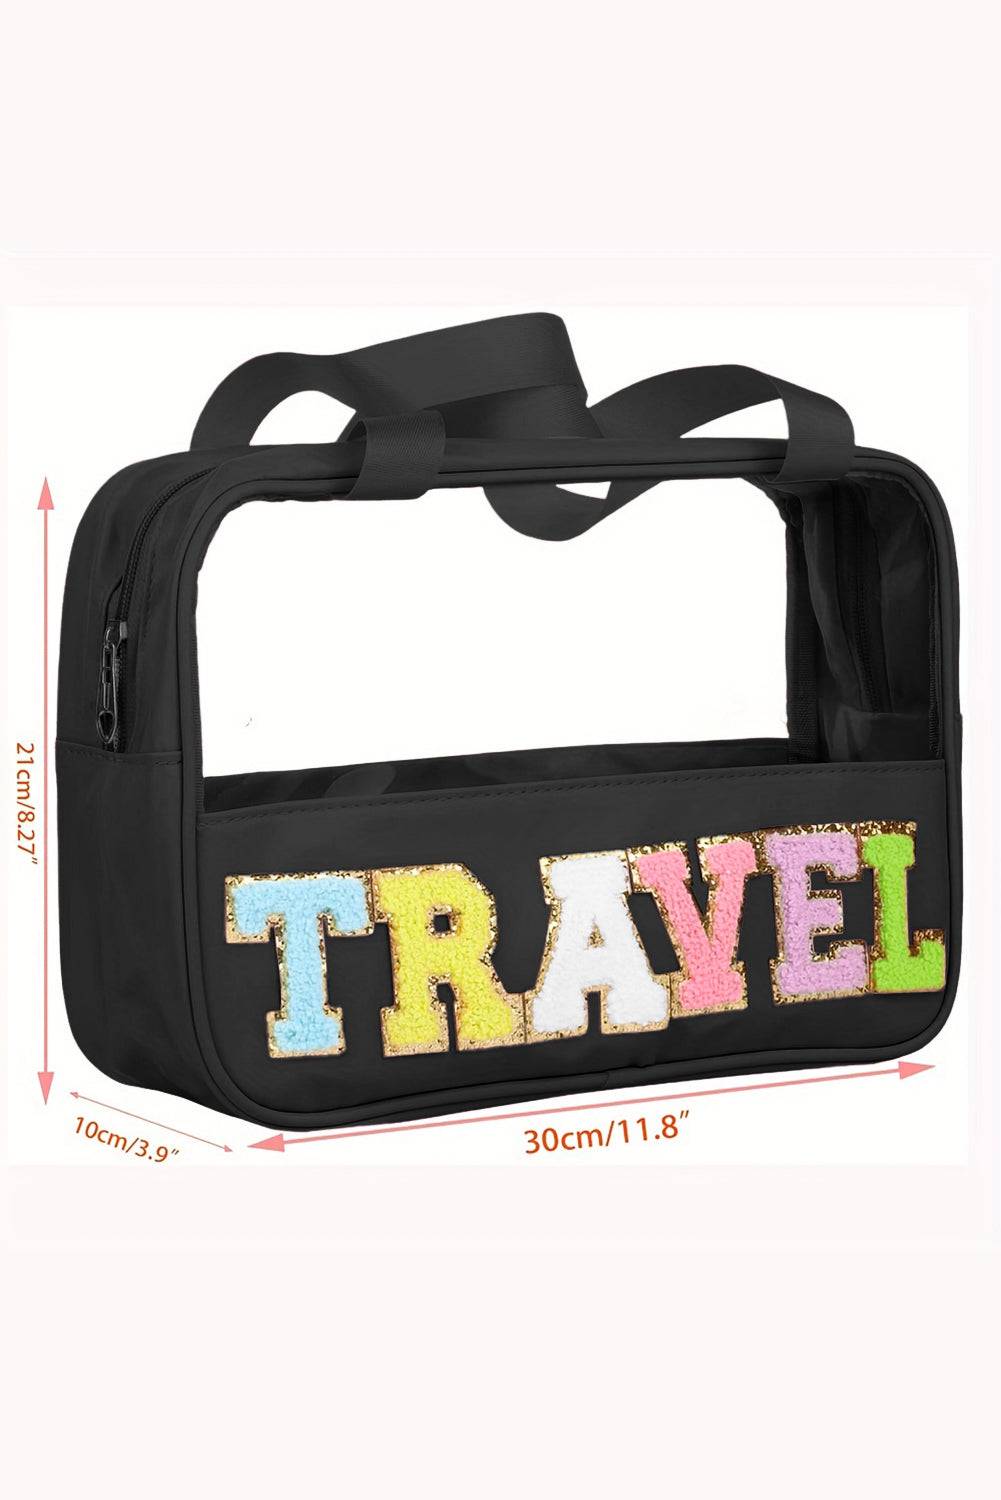 a black travel bag with the word travel printed on it